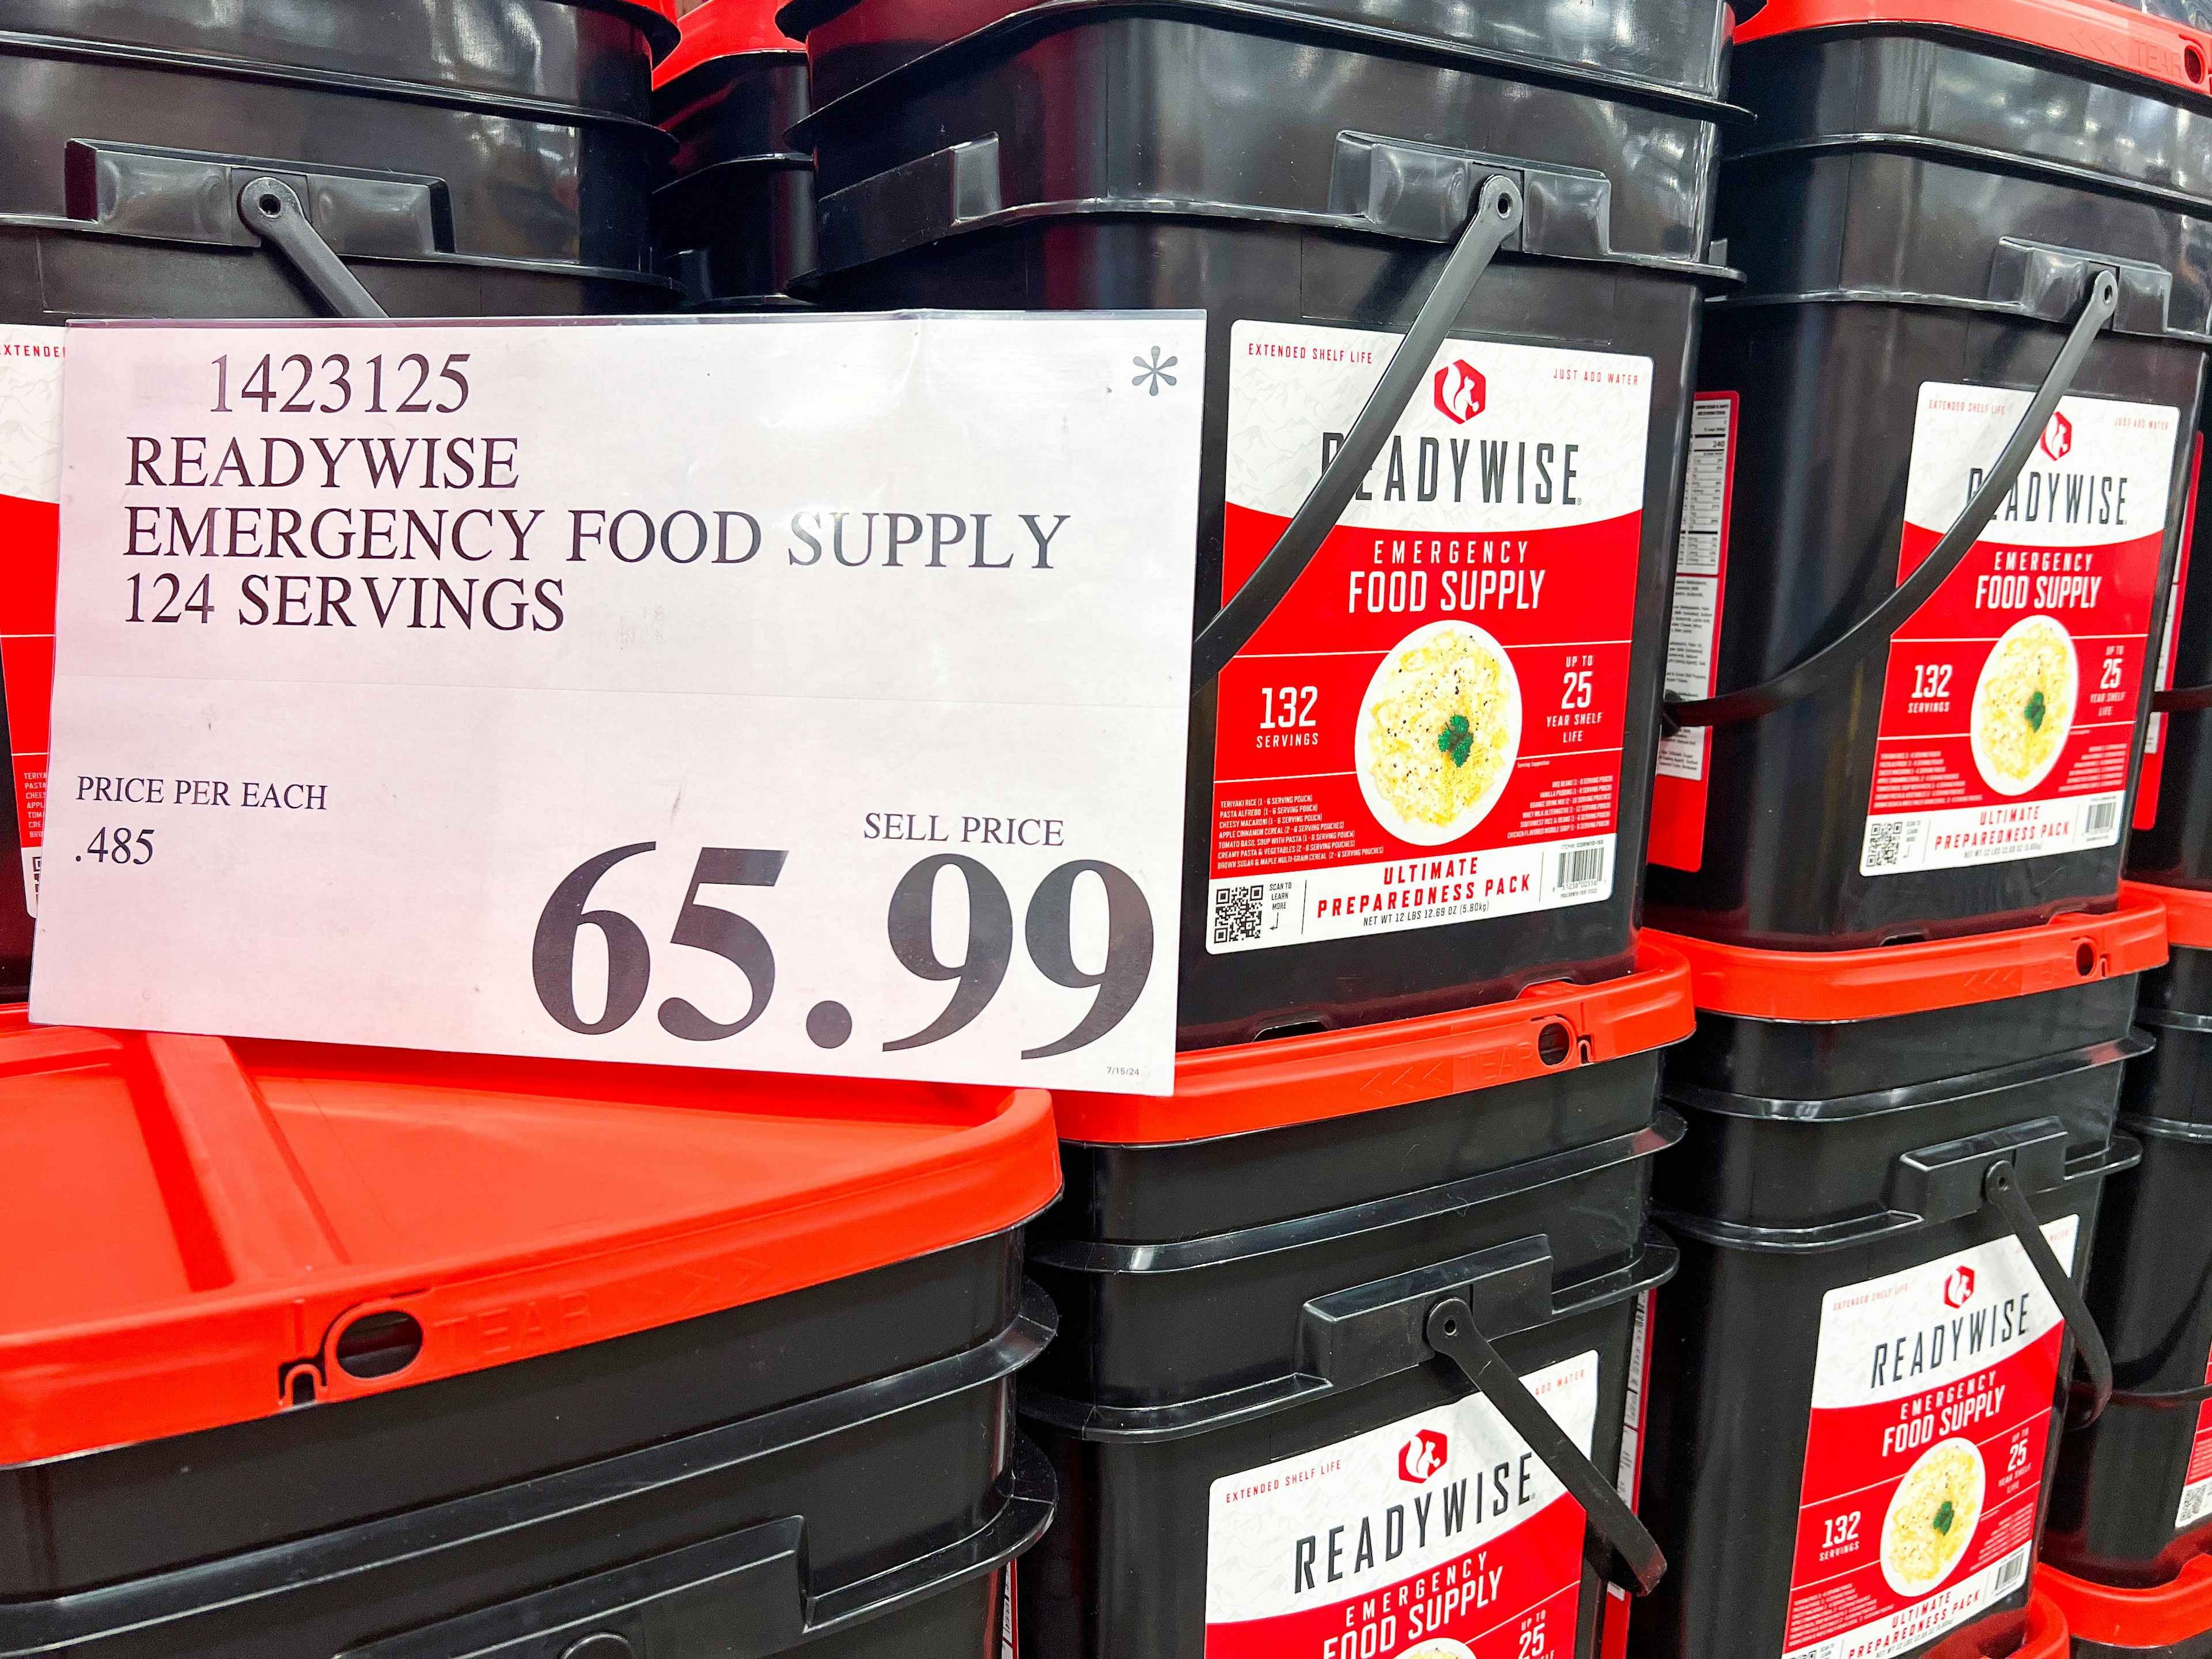 costco-readywise-emergency-food-supply-kcl-5